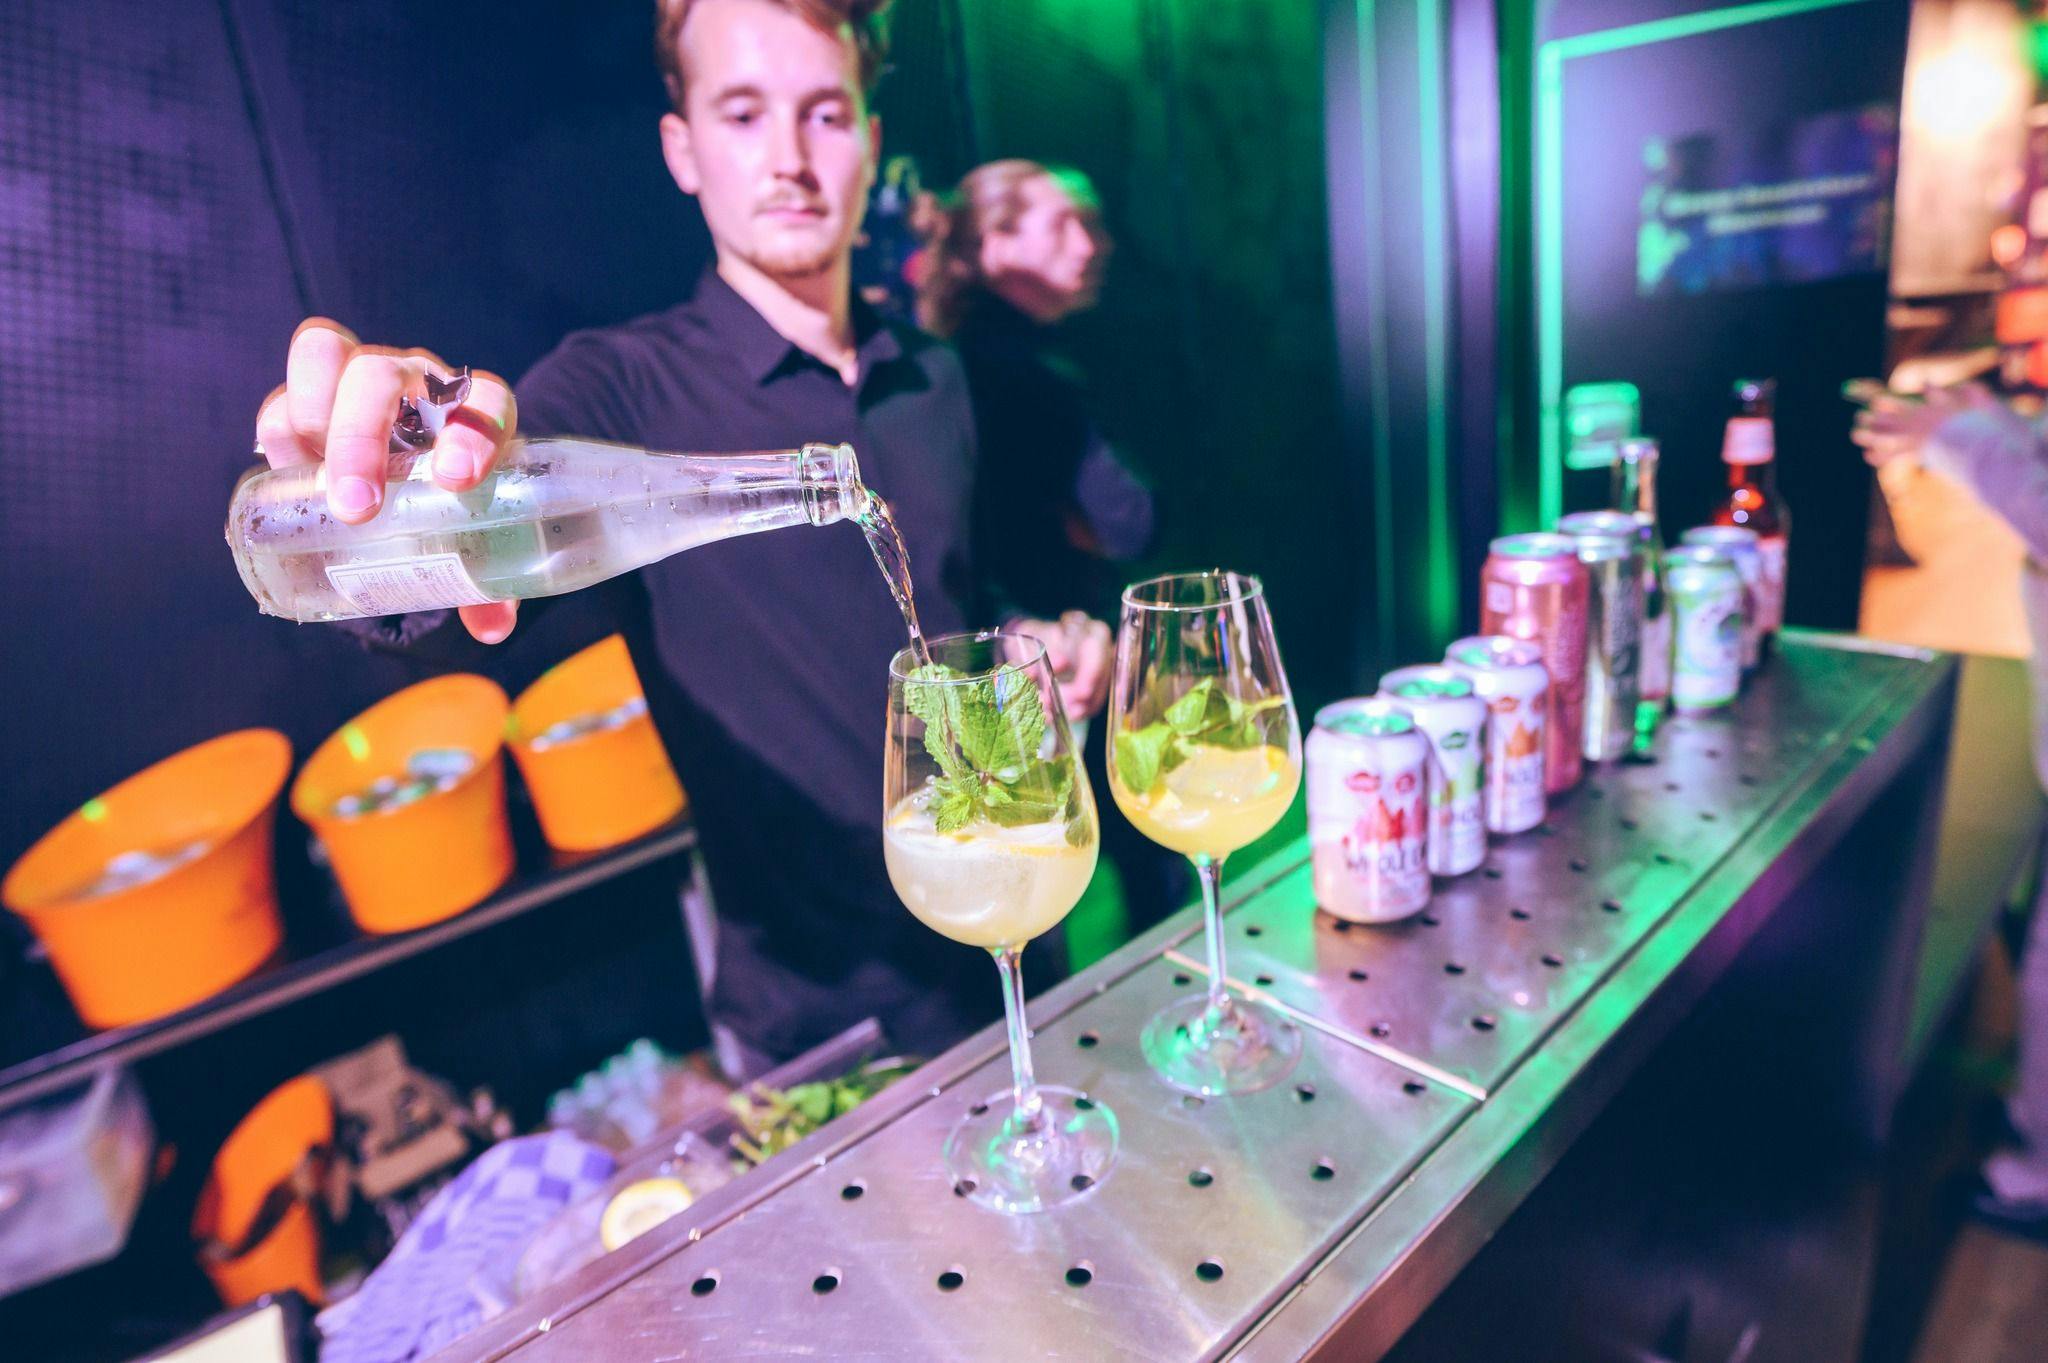 French Nightclubs Come Together for Plastic-free Dancefloors